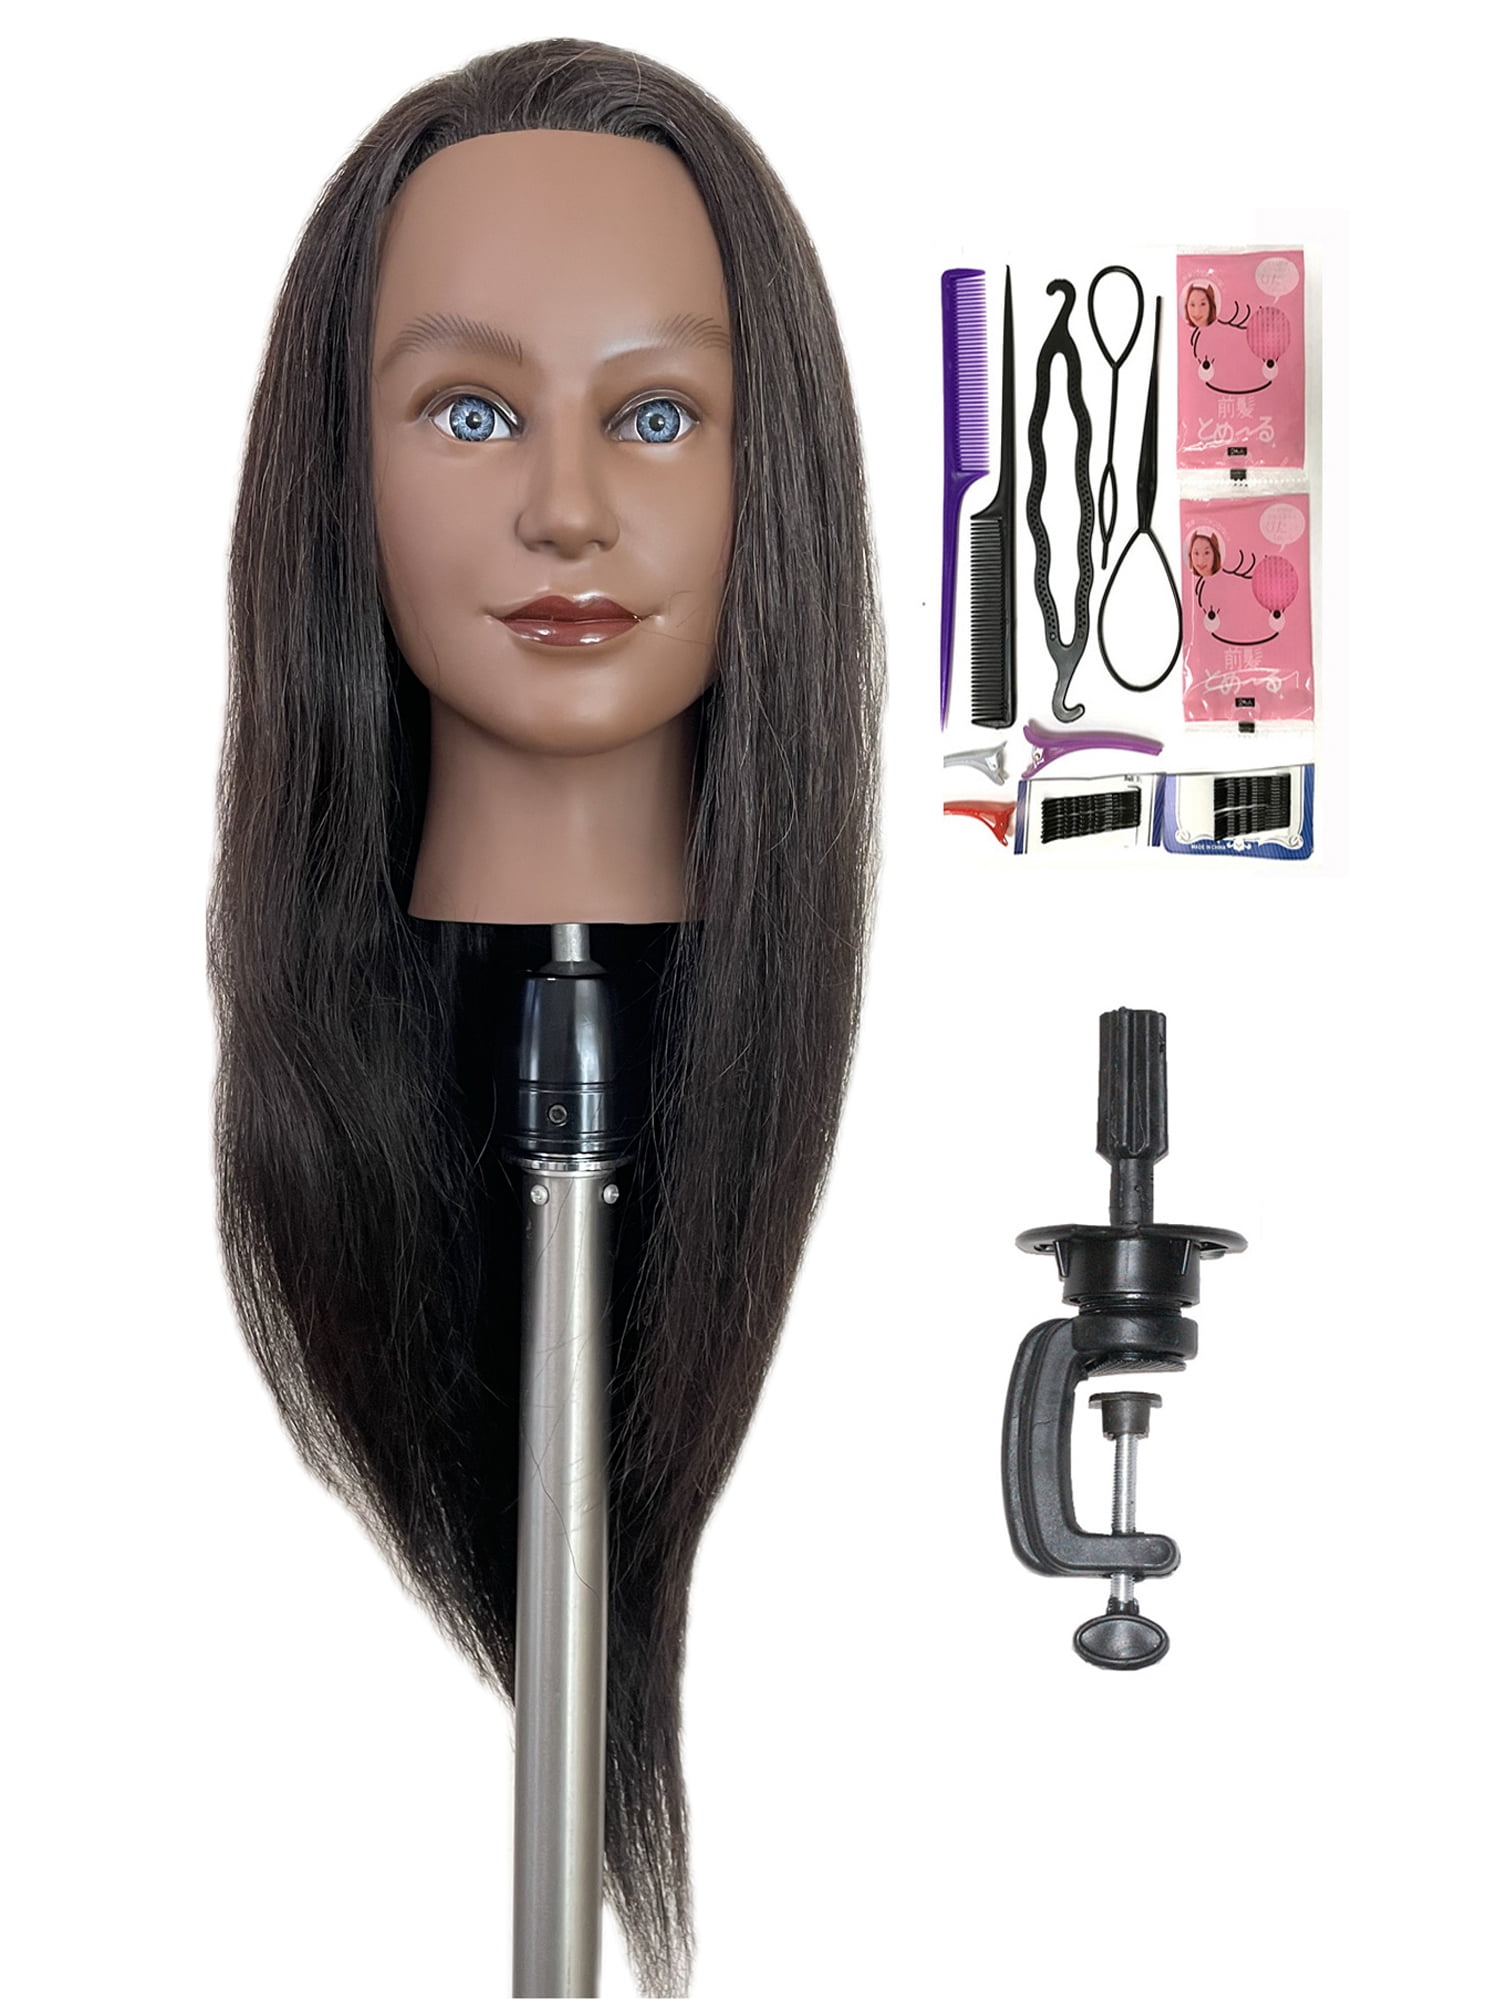  My Doll; 100% Human Hair Styling Head Doll Toy + Stand (Toffee)  : Toys & Games